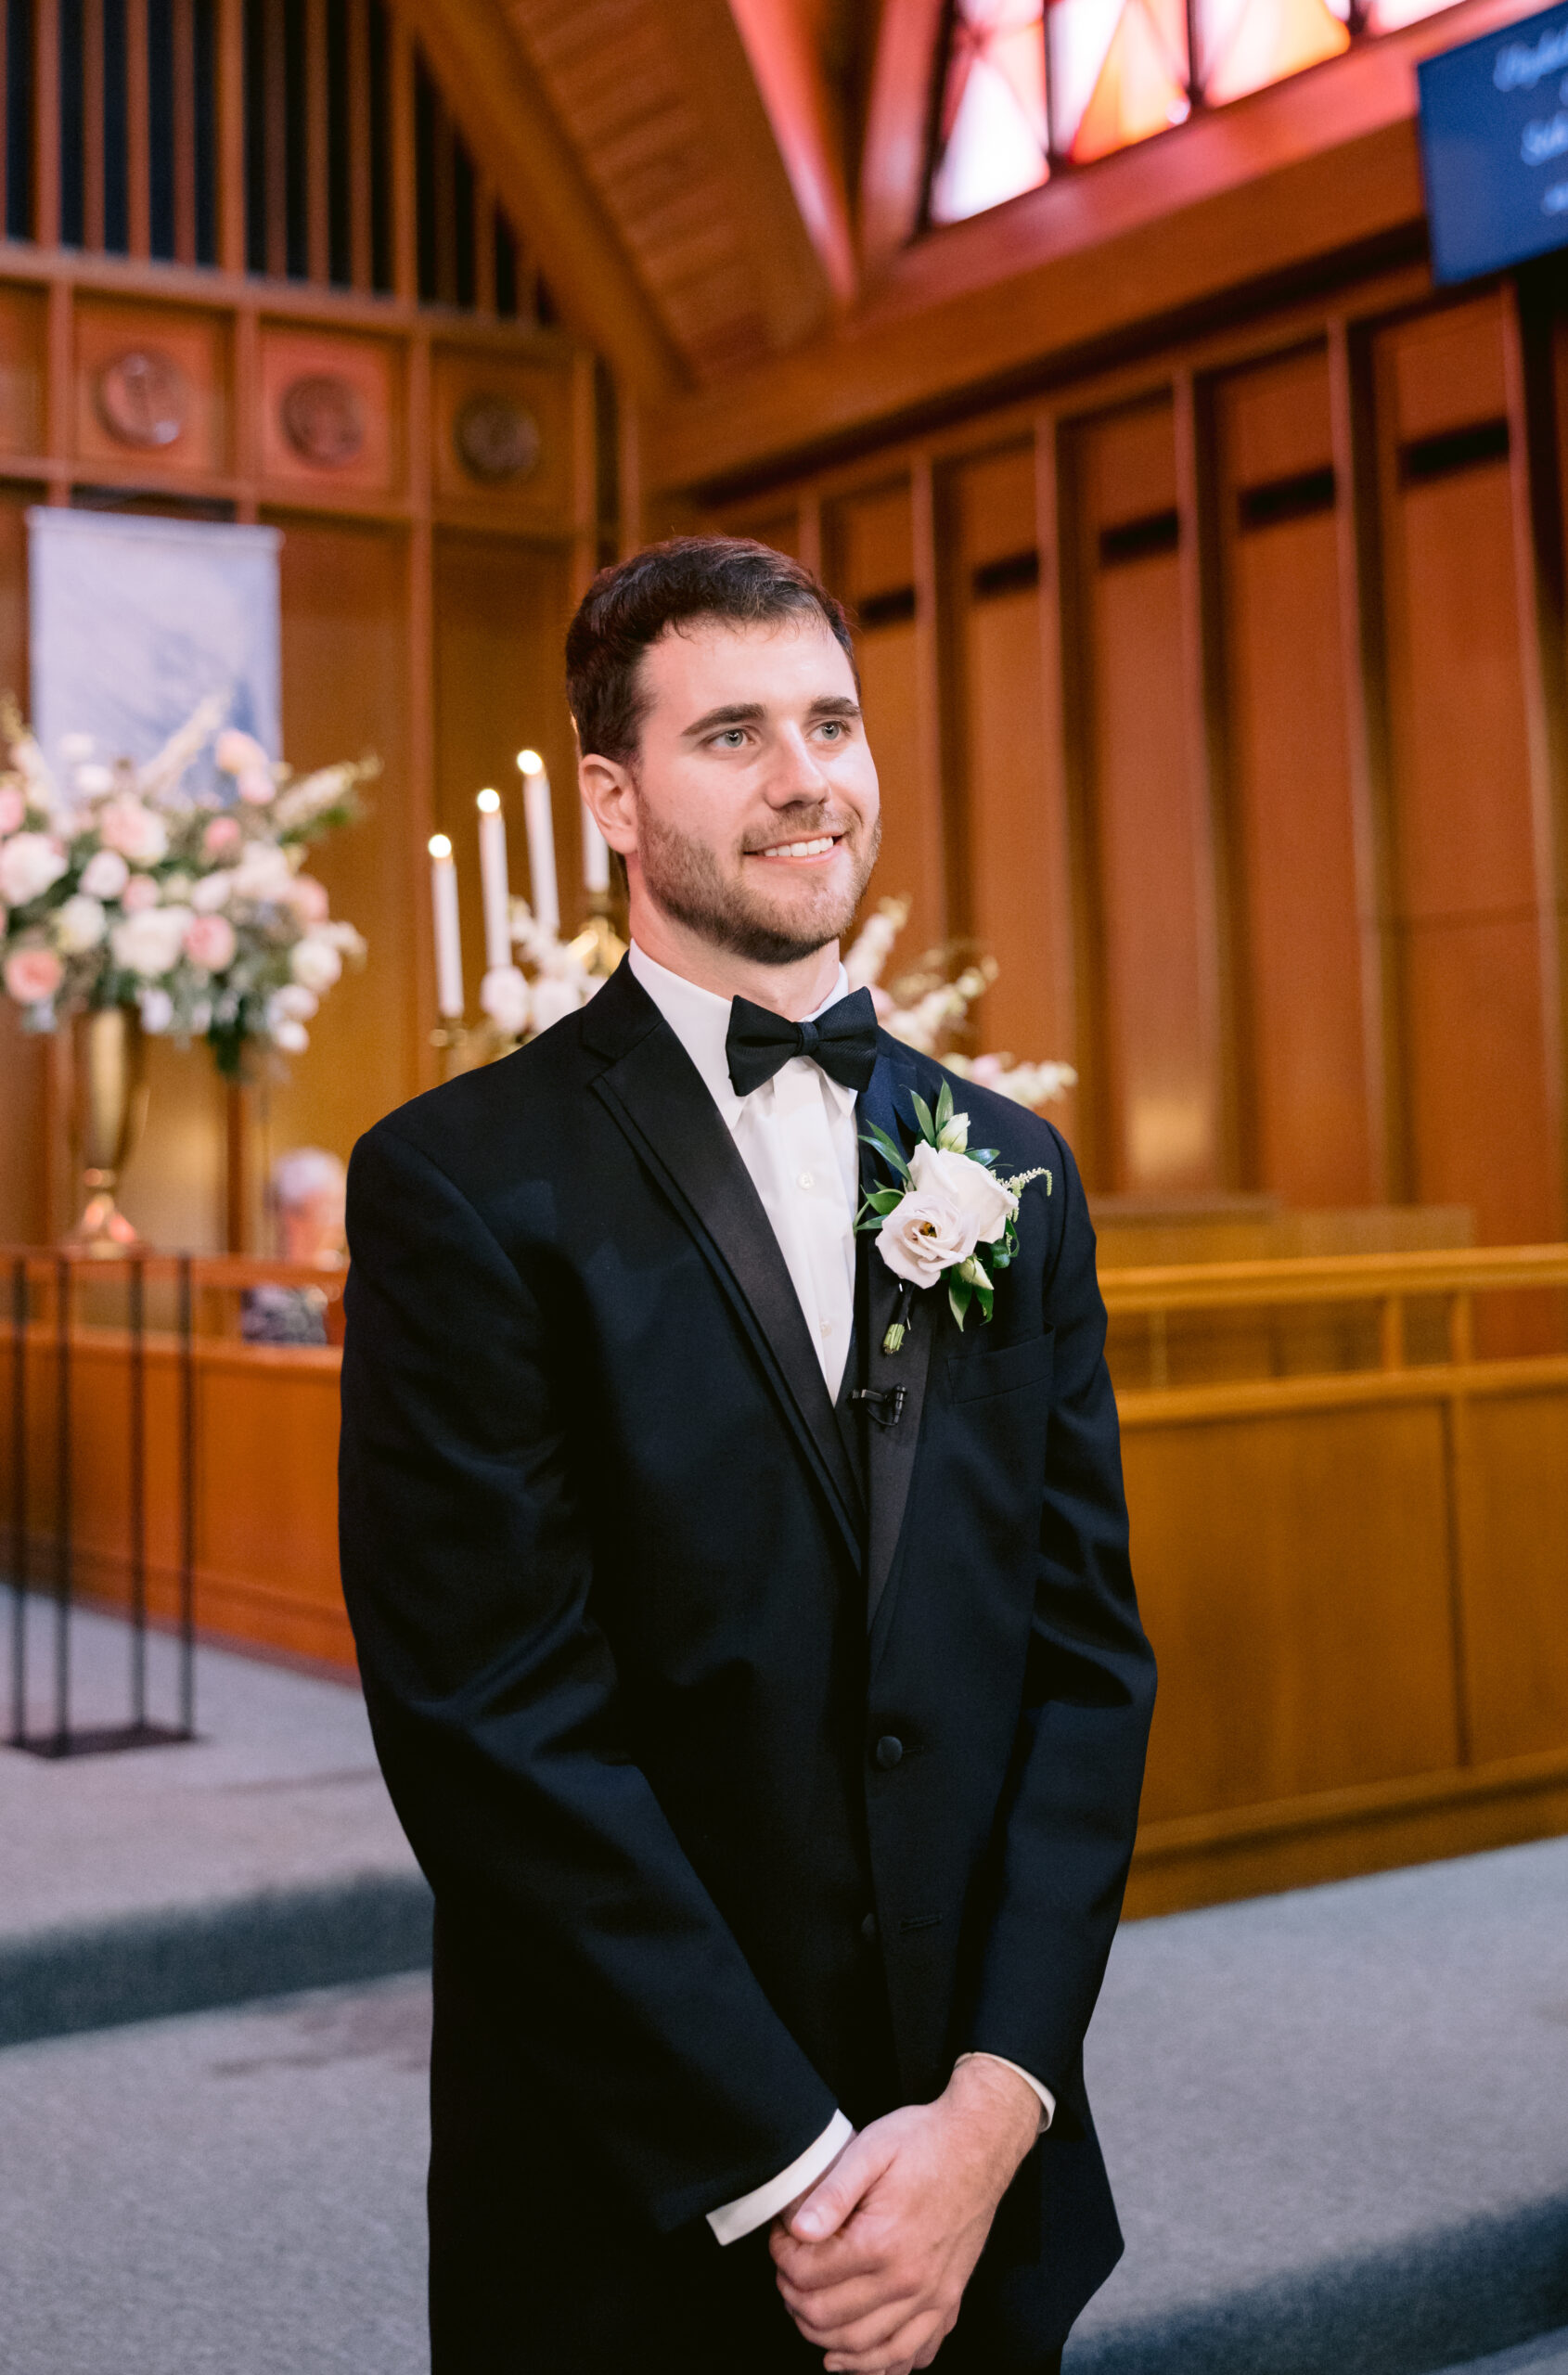 Groom looking at the bride walking down the isle inside a catholic church